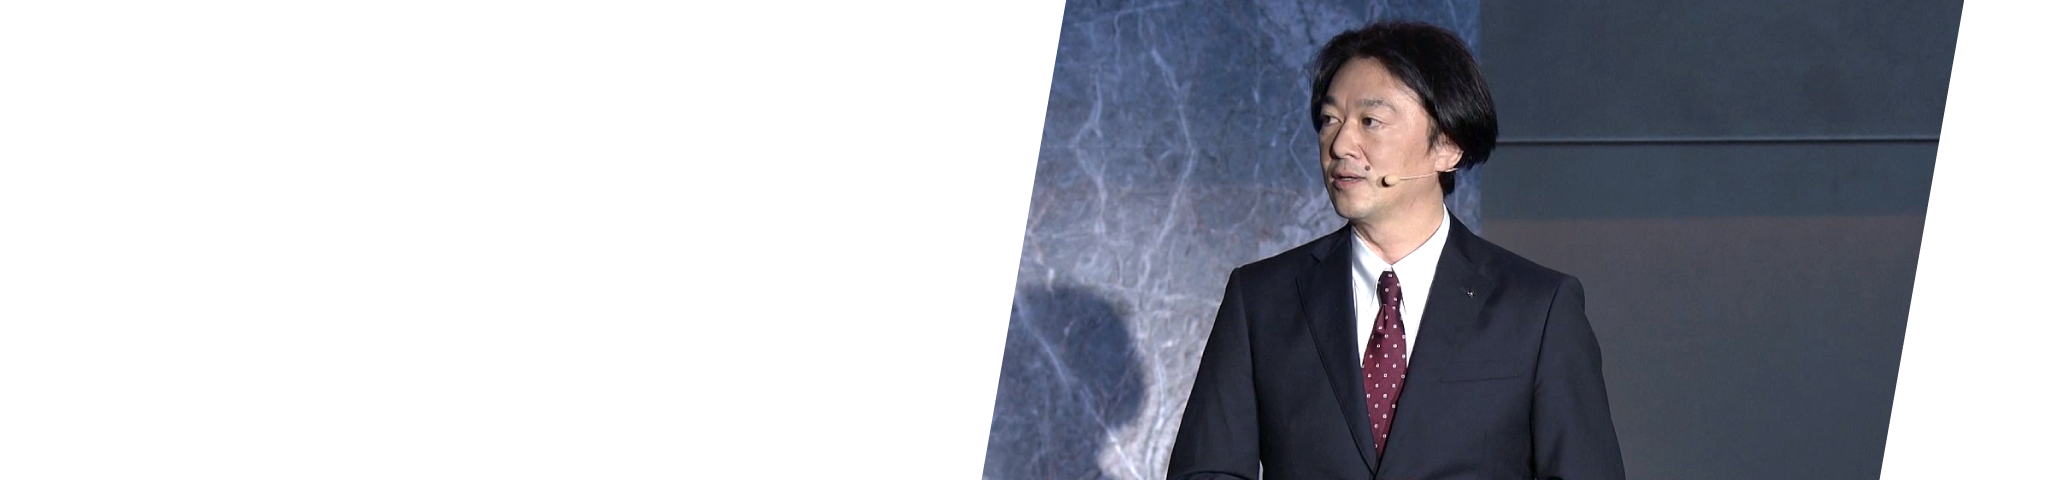 Cross-Media Business Love and Respect for IP Breeds Quality Content Director Division Manager, Cross Media Business Management Eiichi Kamagata